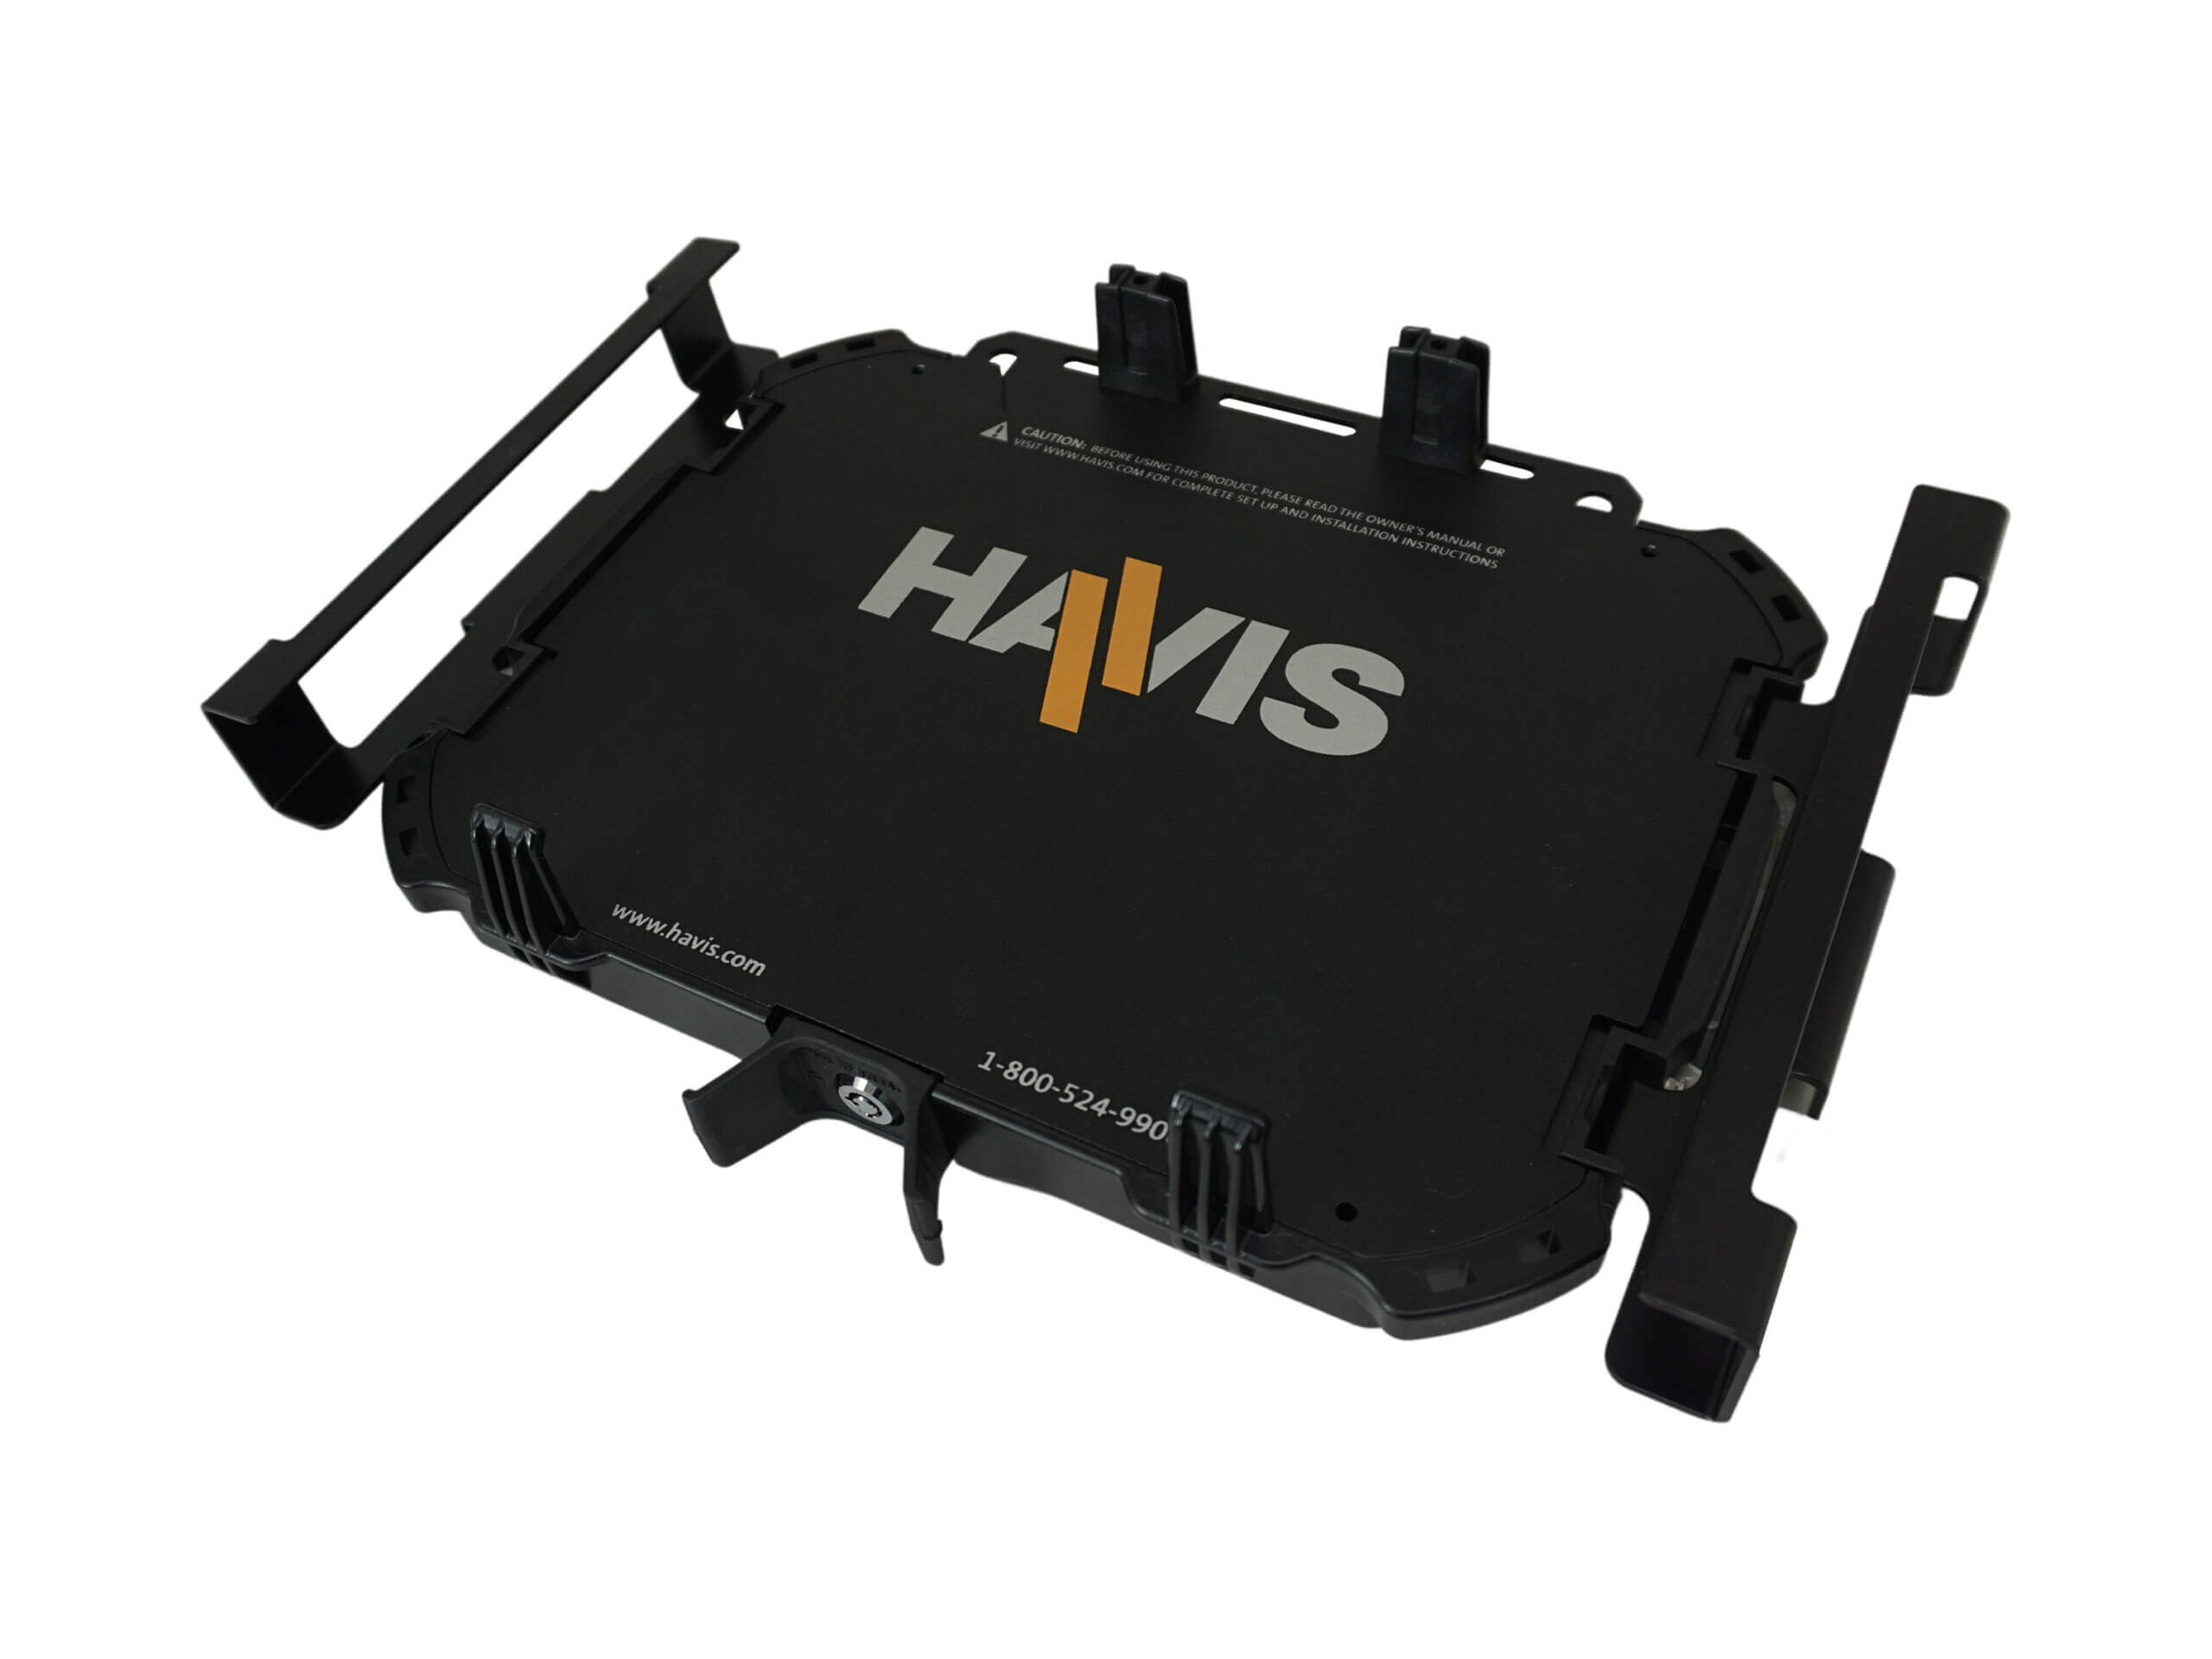 Havis Rugged Cradle for Dell 7230 and 7220 Rugged Extreme Tablet